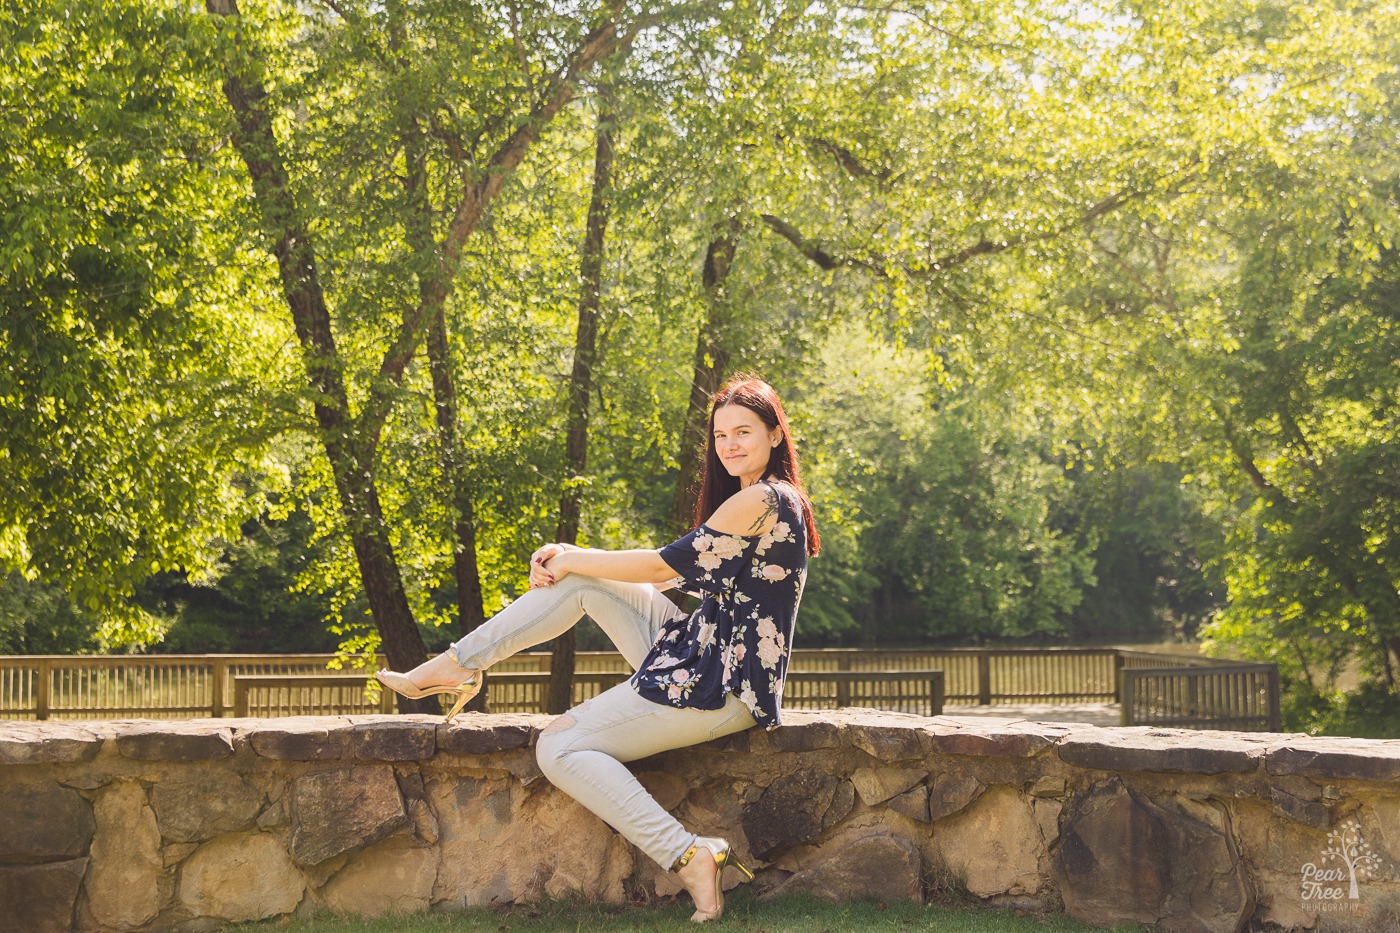 Cute high school senior posing at Olde Rope Mill Park wearing ripped jeans, high heels, and a cute top with Little River in the background